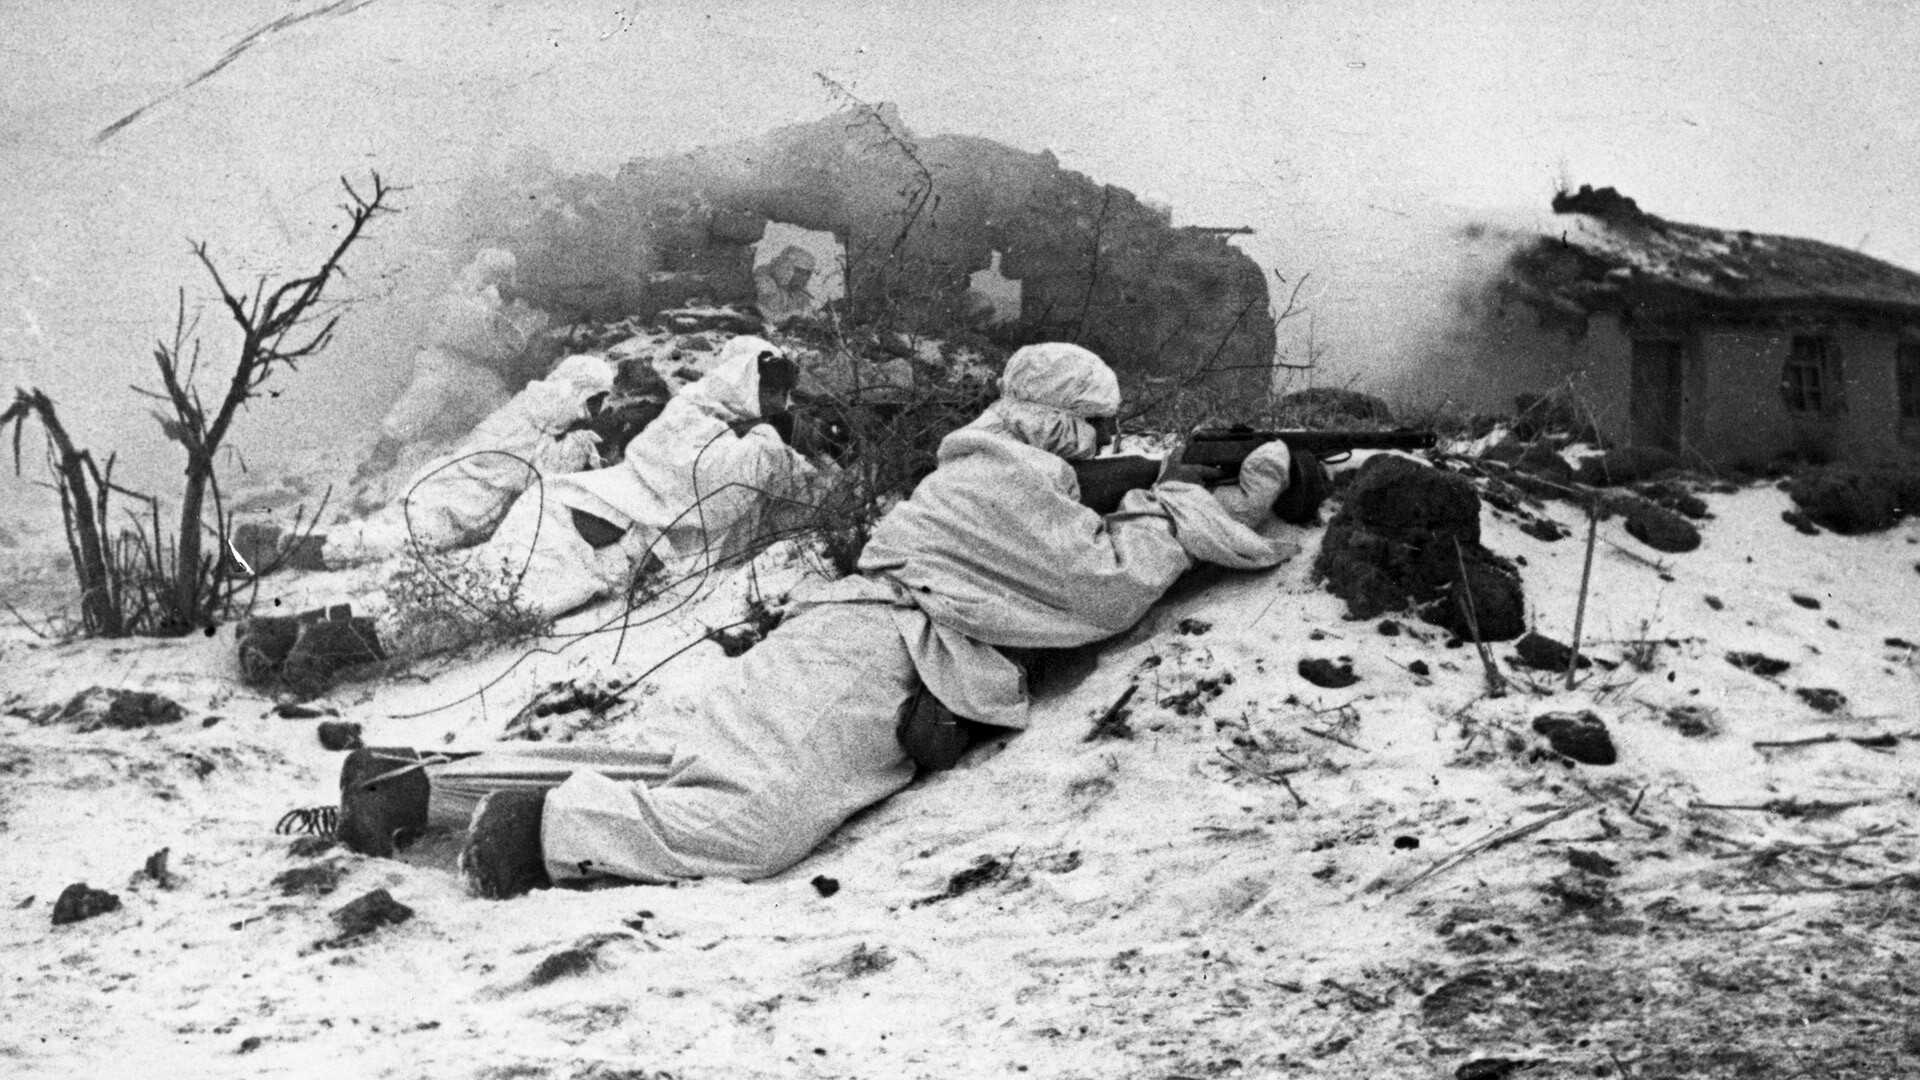 Soviet troops during the Battle of Stalingrad.